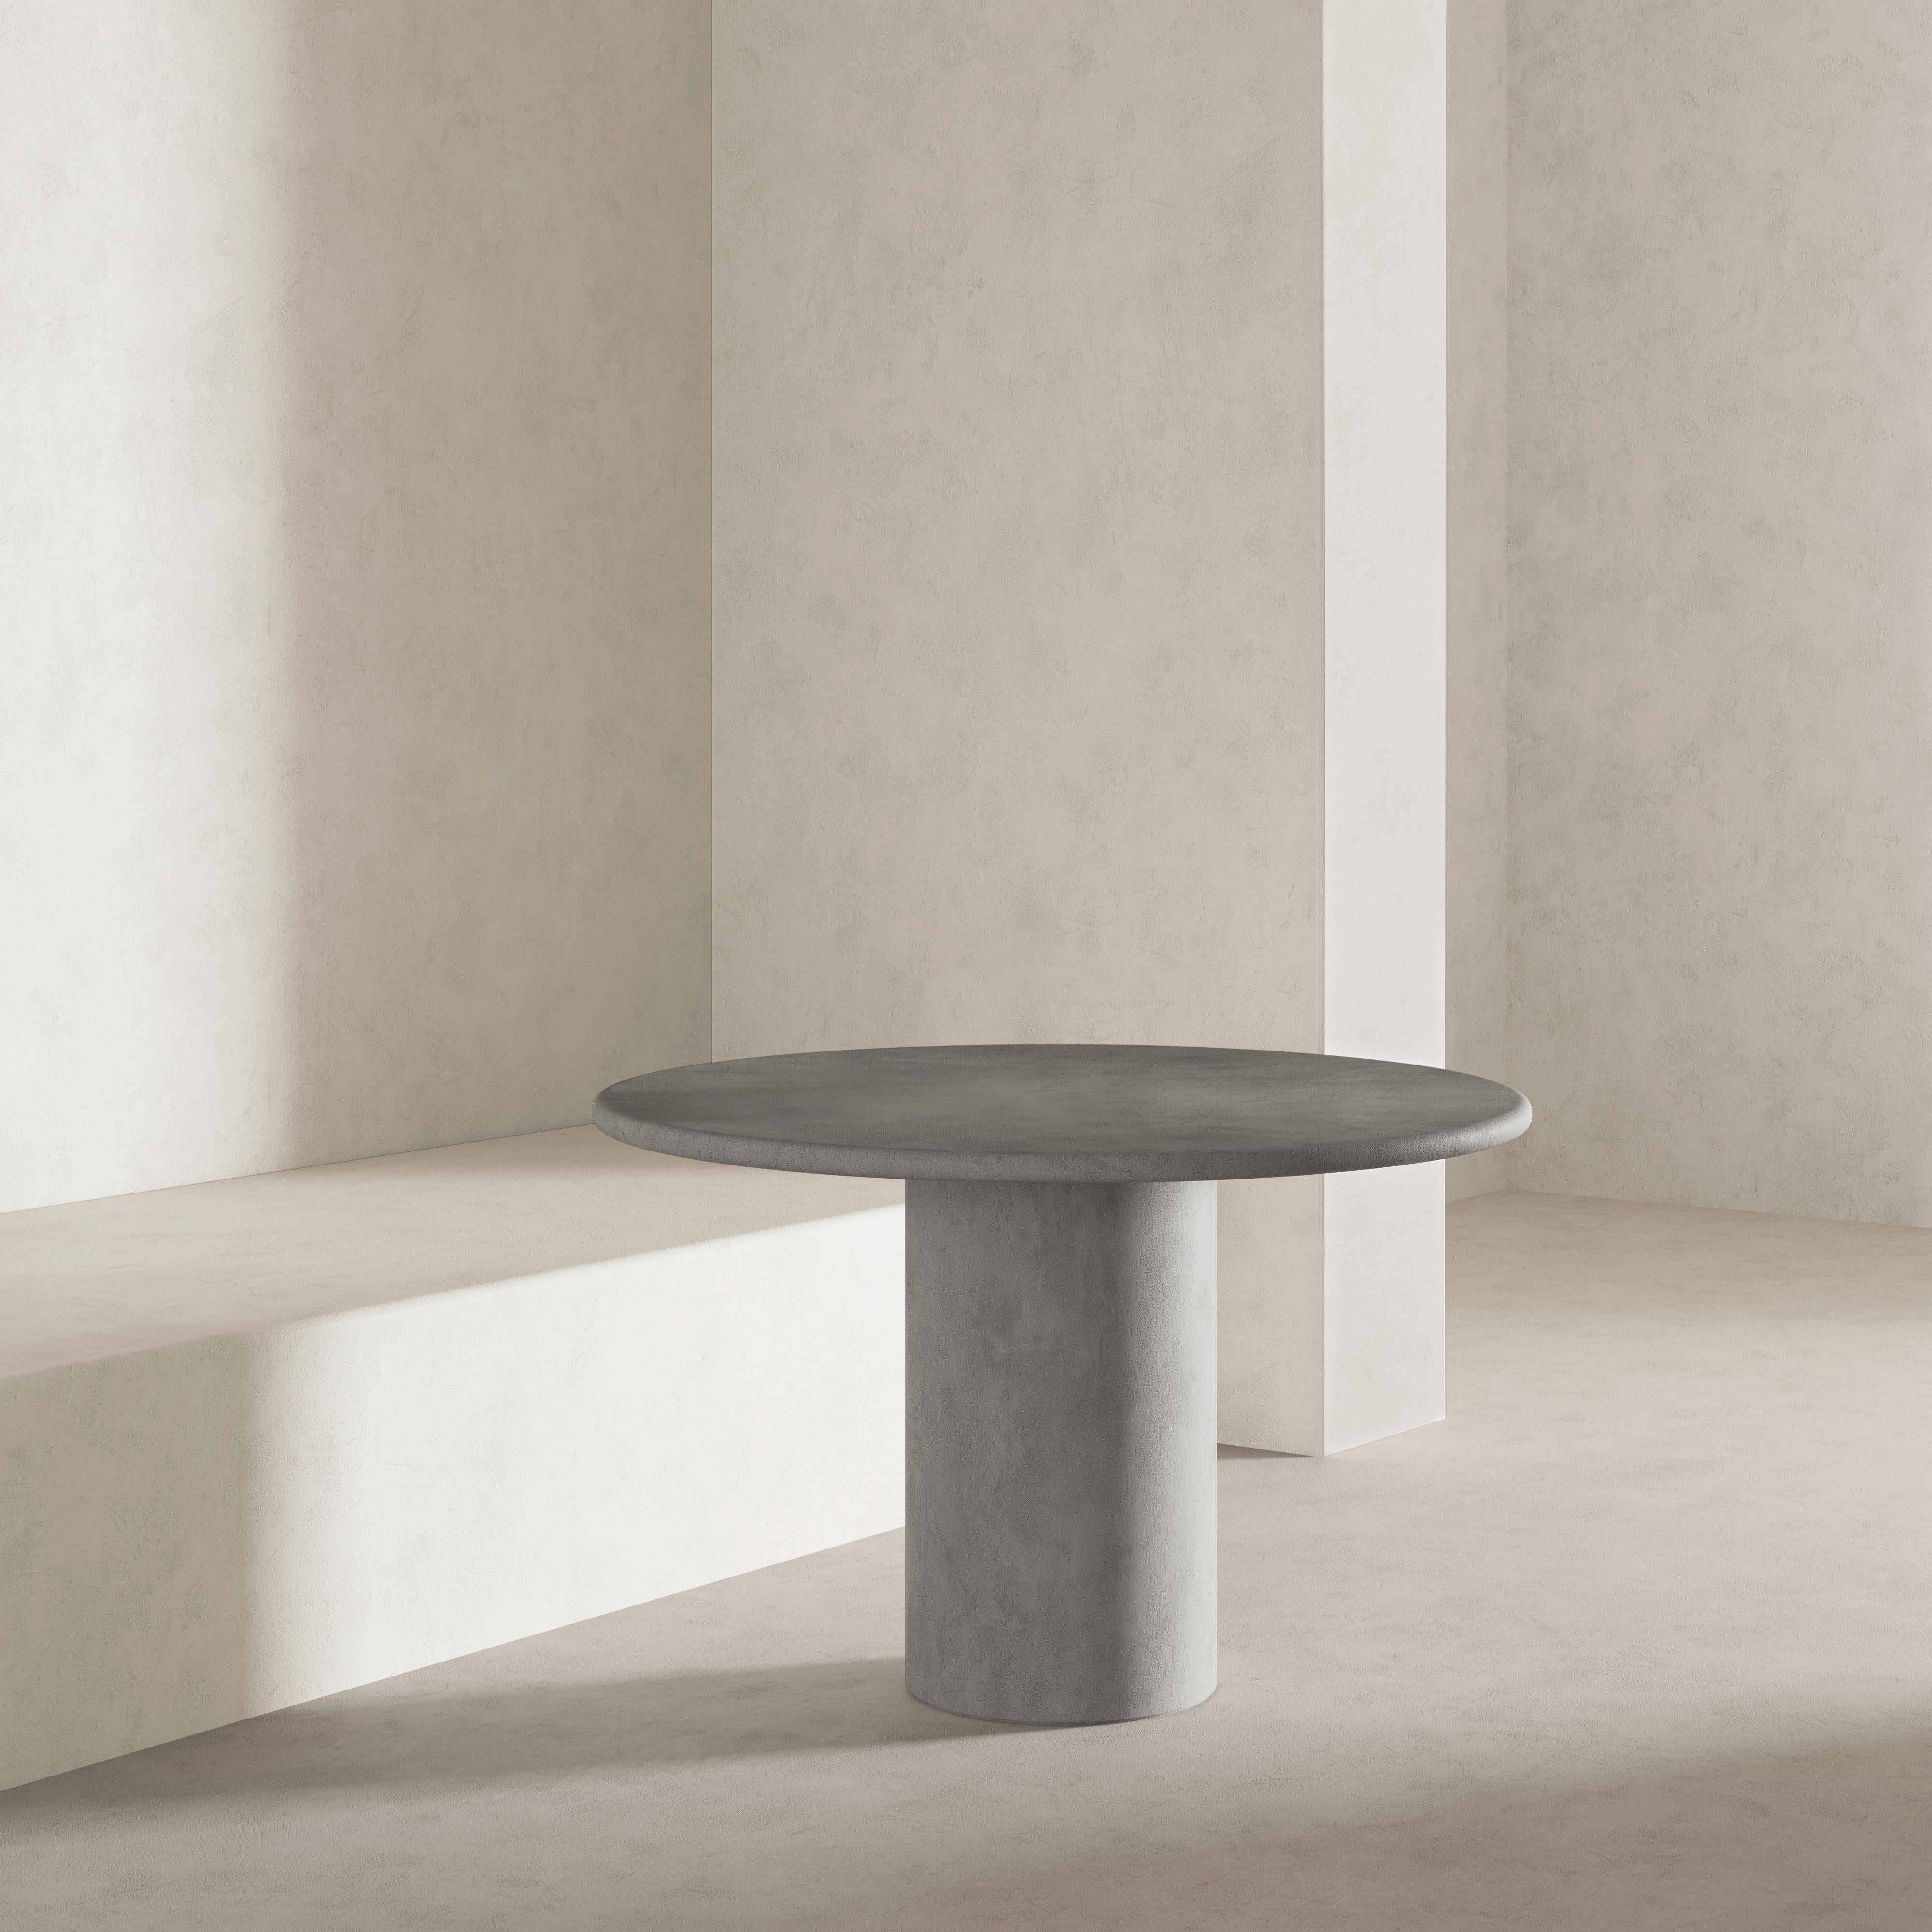 Arata Dinning Table by Kasanai
Dimensions: D 120 x W 120 x H 76 cm.
Materials: Lime plaster.
Also available in different dimensions and colors. Please contact us.

Elevate your space with Arata – where every moment becomes an indulgence. Each table